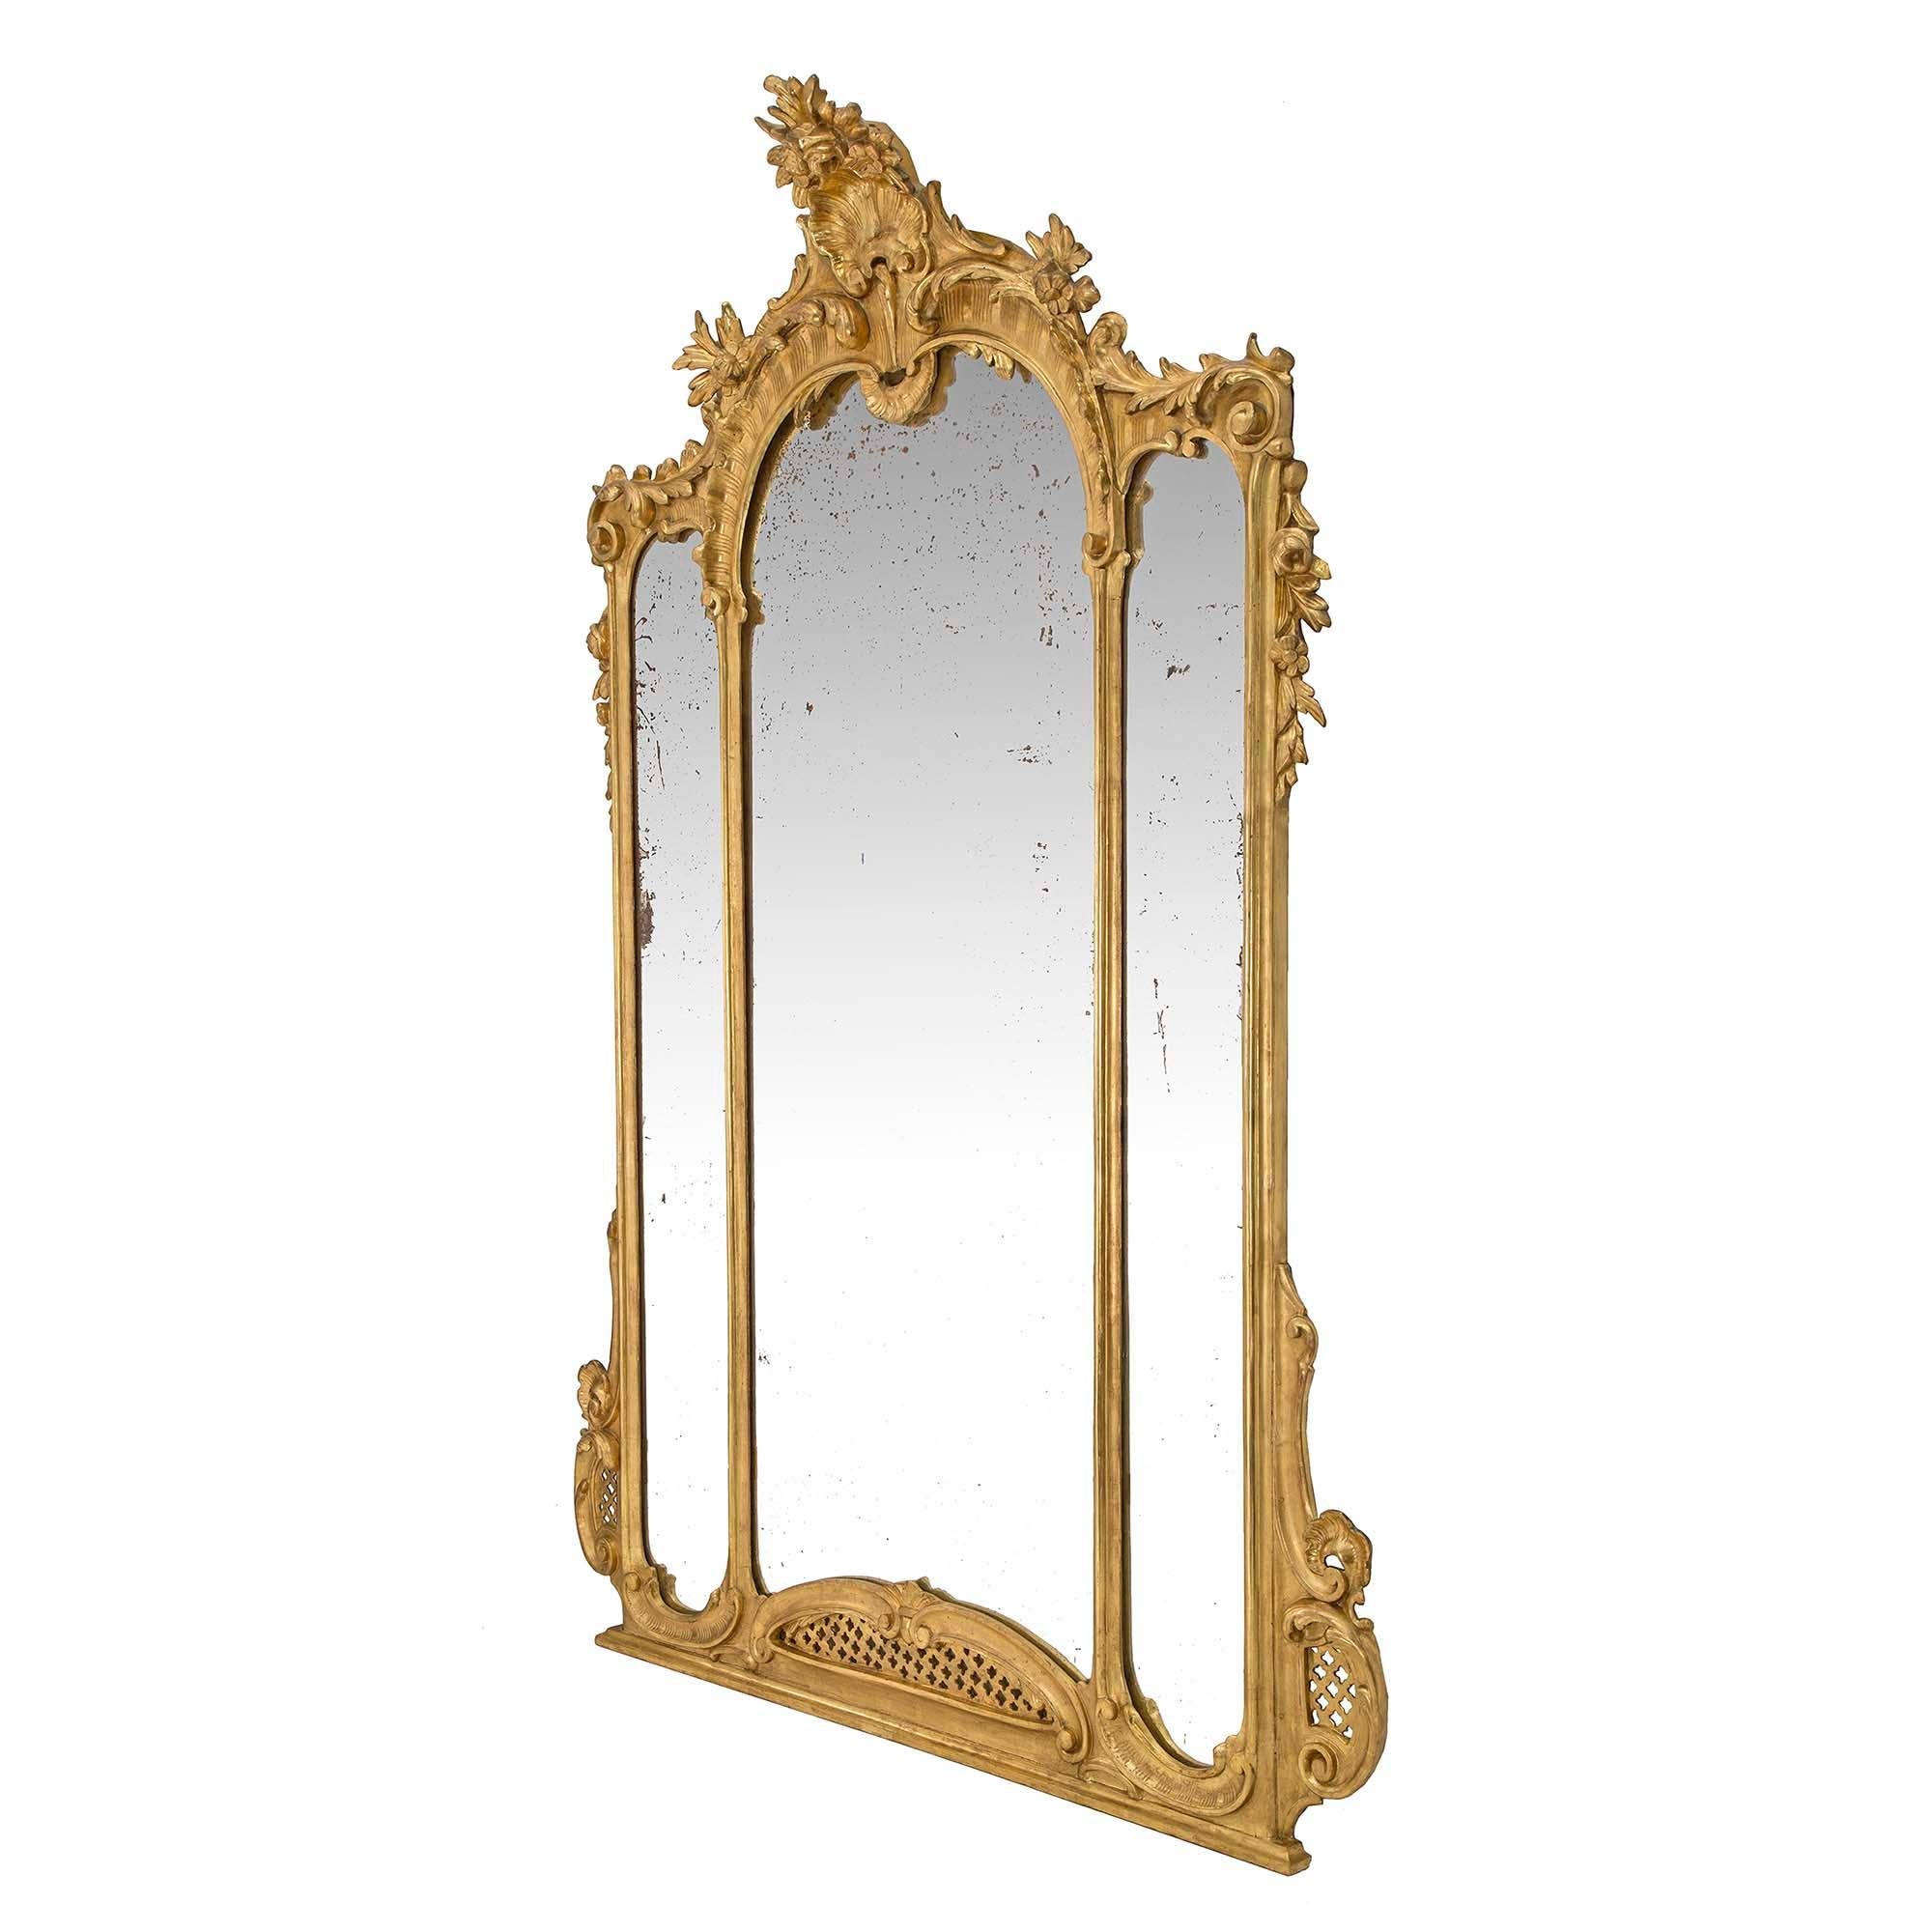 A handsome and large scale Italian 19th century Louis XV st. giltwood mirror. The mirror has three mirror plates within the double frame. At the straight base are lovely foliate scrolls and a pierced rosette design repeated at each side. At the top